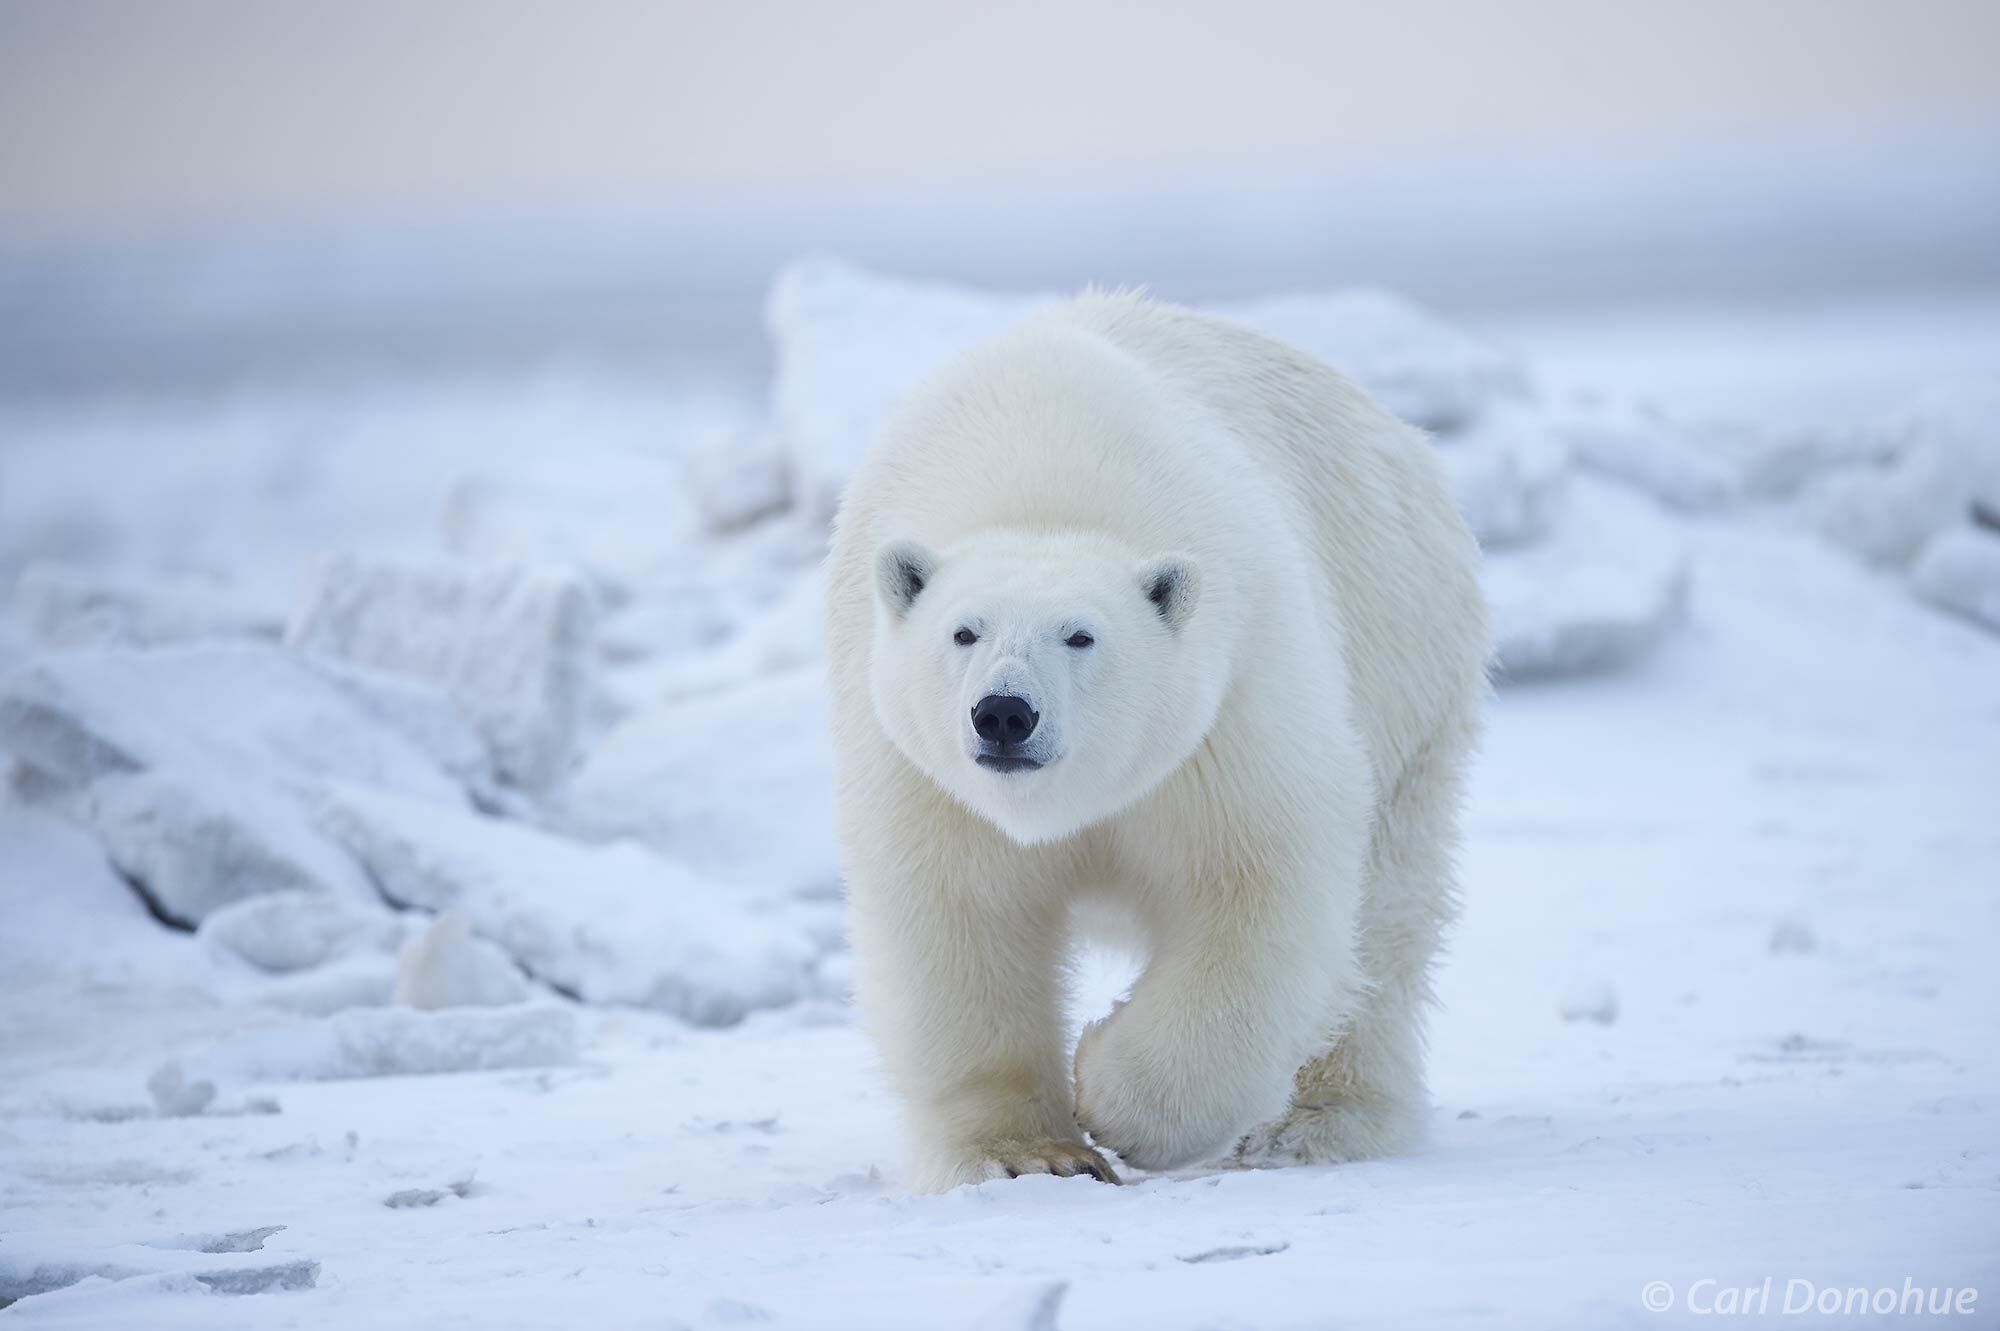 A young adult male polar bear walking over broken sheets of ice. The Beaufort Sea freezes over in early fall, or autumn, and...